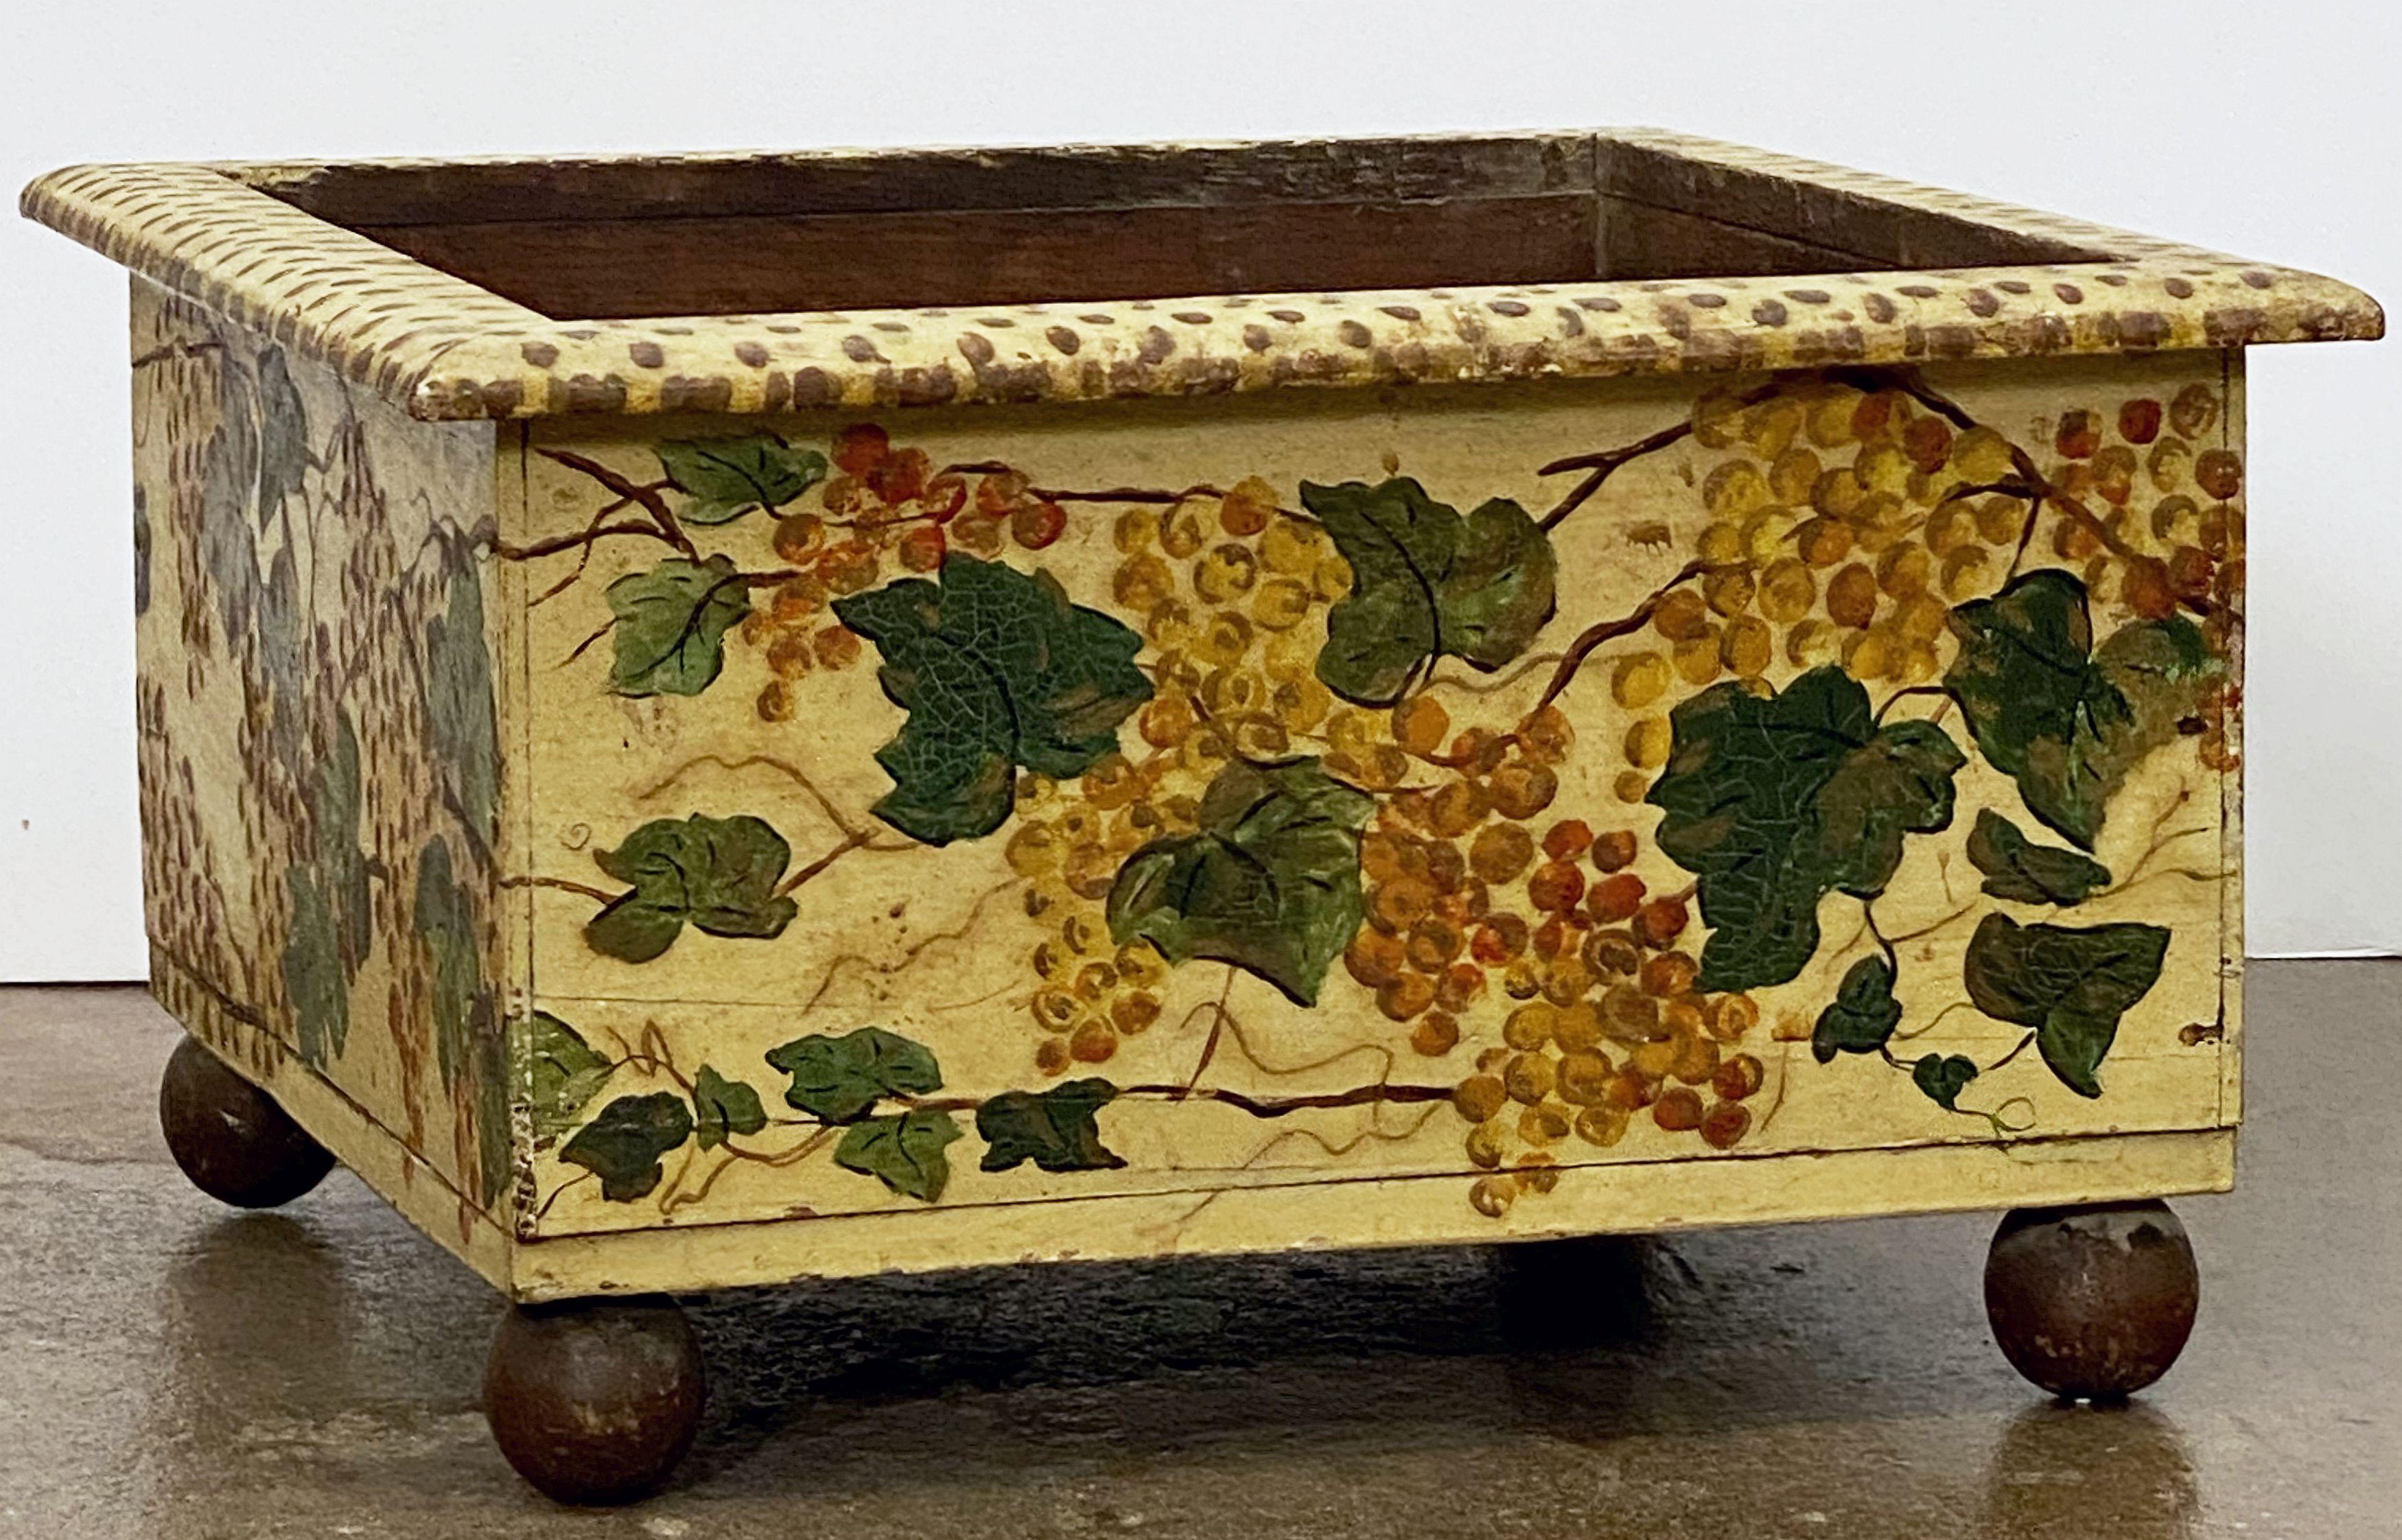 A fine early Italian square flower box or planter from the 19th c., featuring a moulded frame edge with a lovely painted design of grapes and resting on four ball feet.

Bought in Parma, Italy.